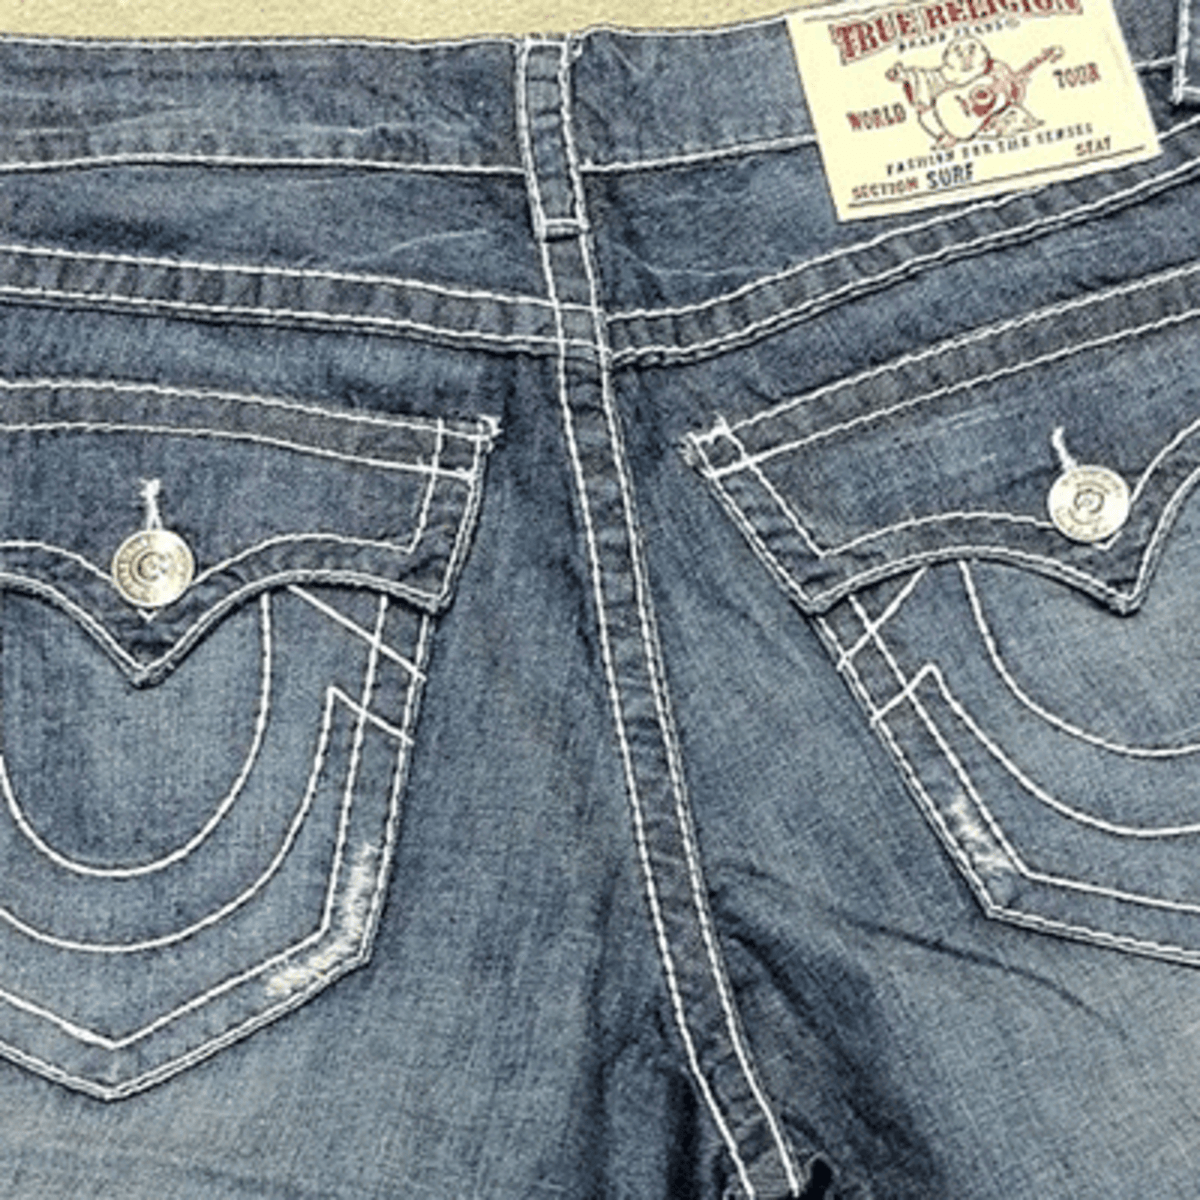 true religion jeans played out